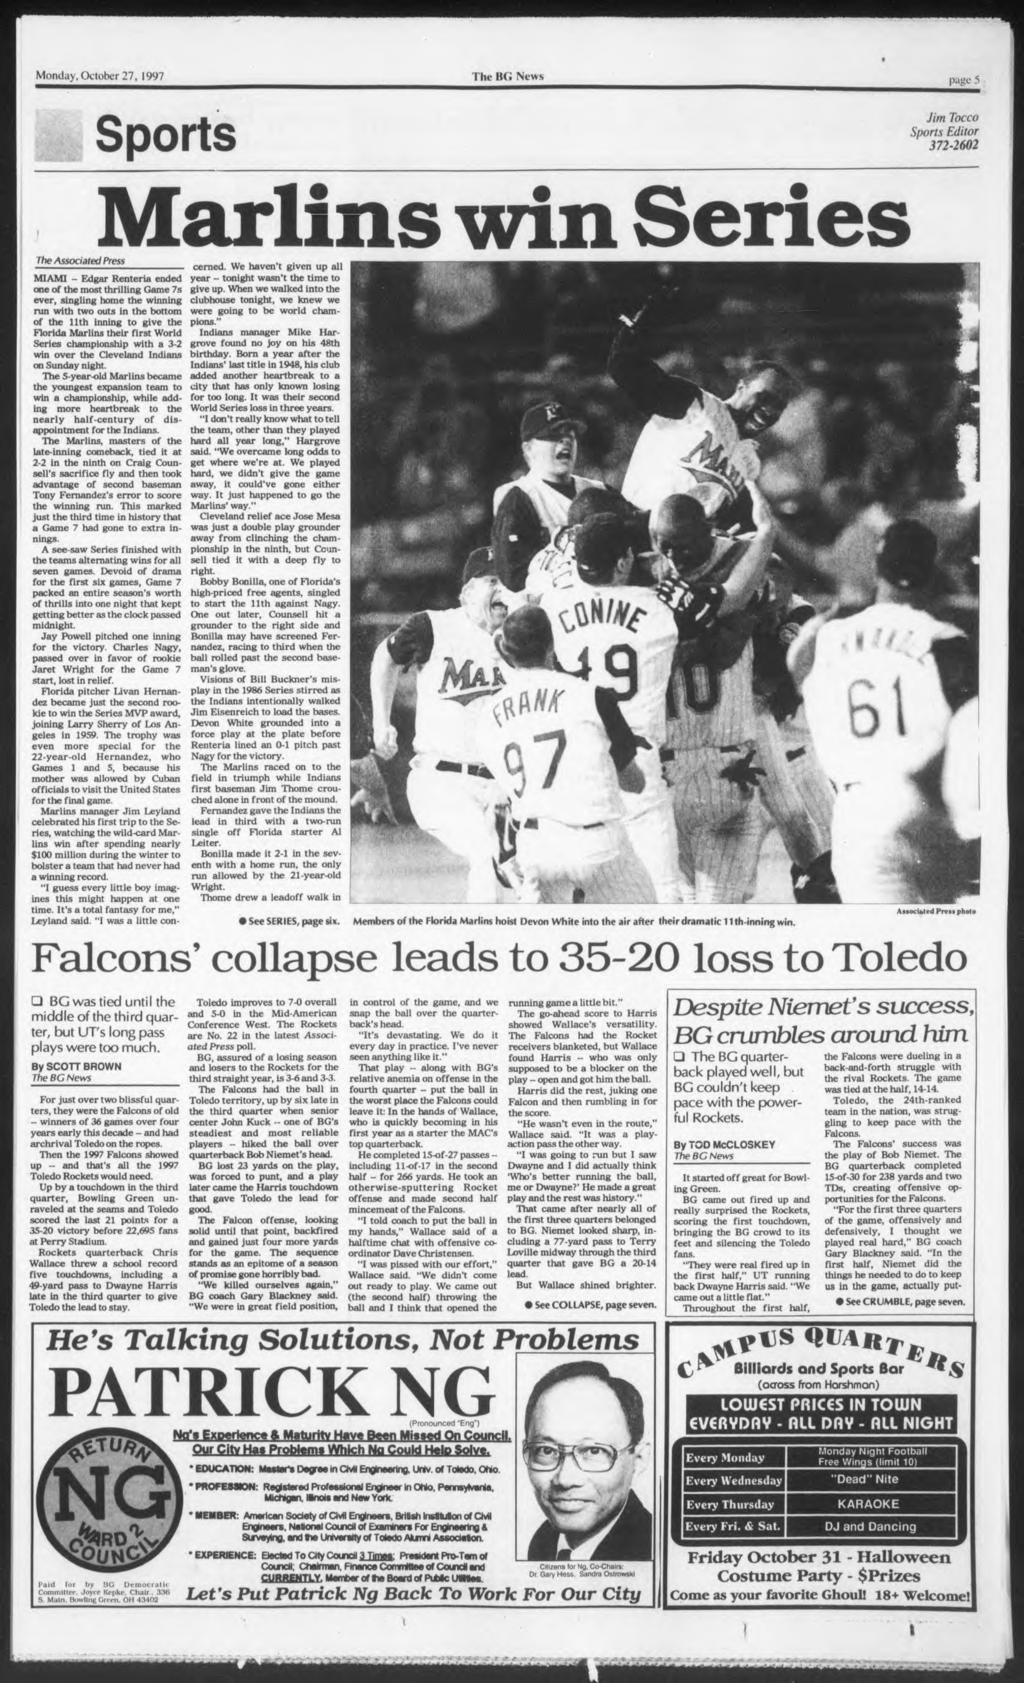 Monday, October 27, 1997 page S Sports Jim Tocco Sports Editor 372-2602 Marlins win Series The Associated Press MIAMI - Edgar Renteria ended one of the most thrilling Game 7s ever, singling home the